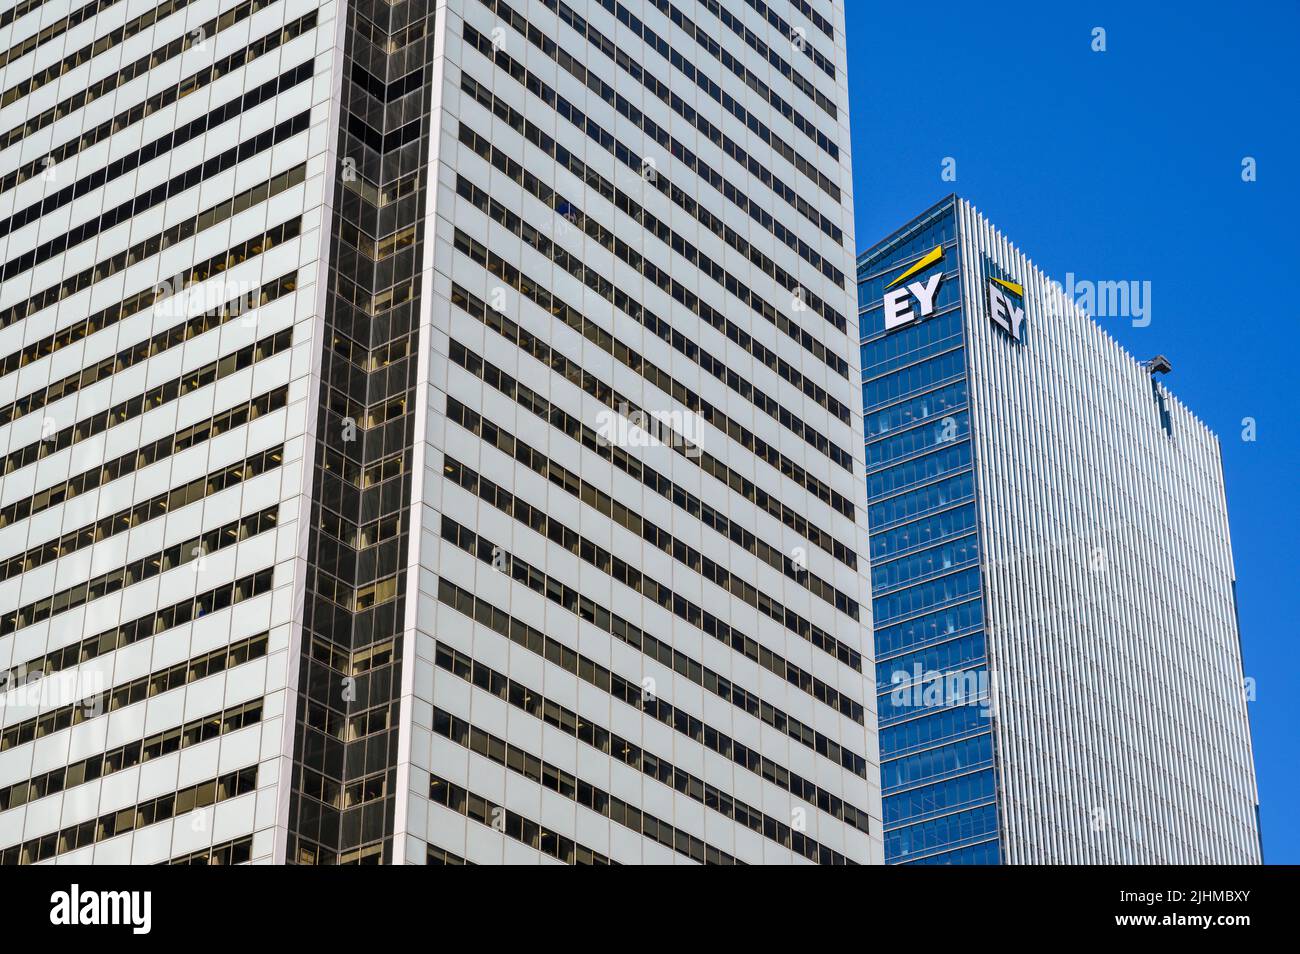 Closeup view of Bank of Montreal (BMO) building towering next to Ernst & Young (EY) office building, downtown Toronto, Ontario, Canada. Stock Photo